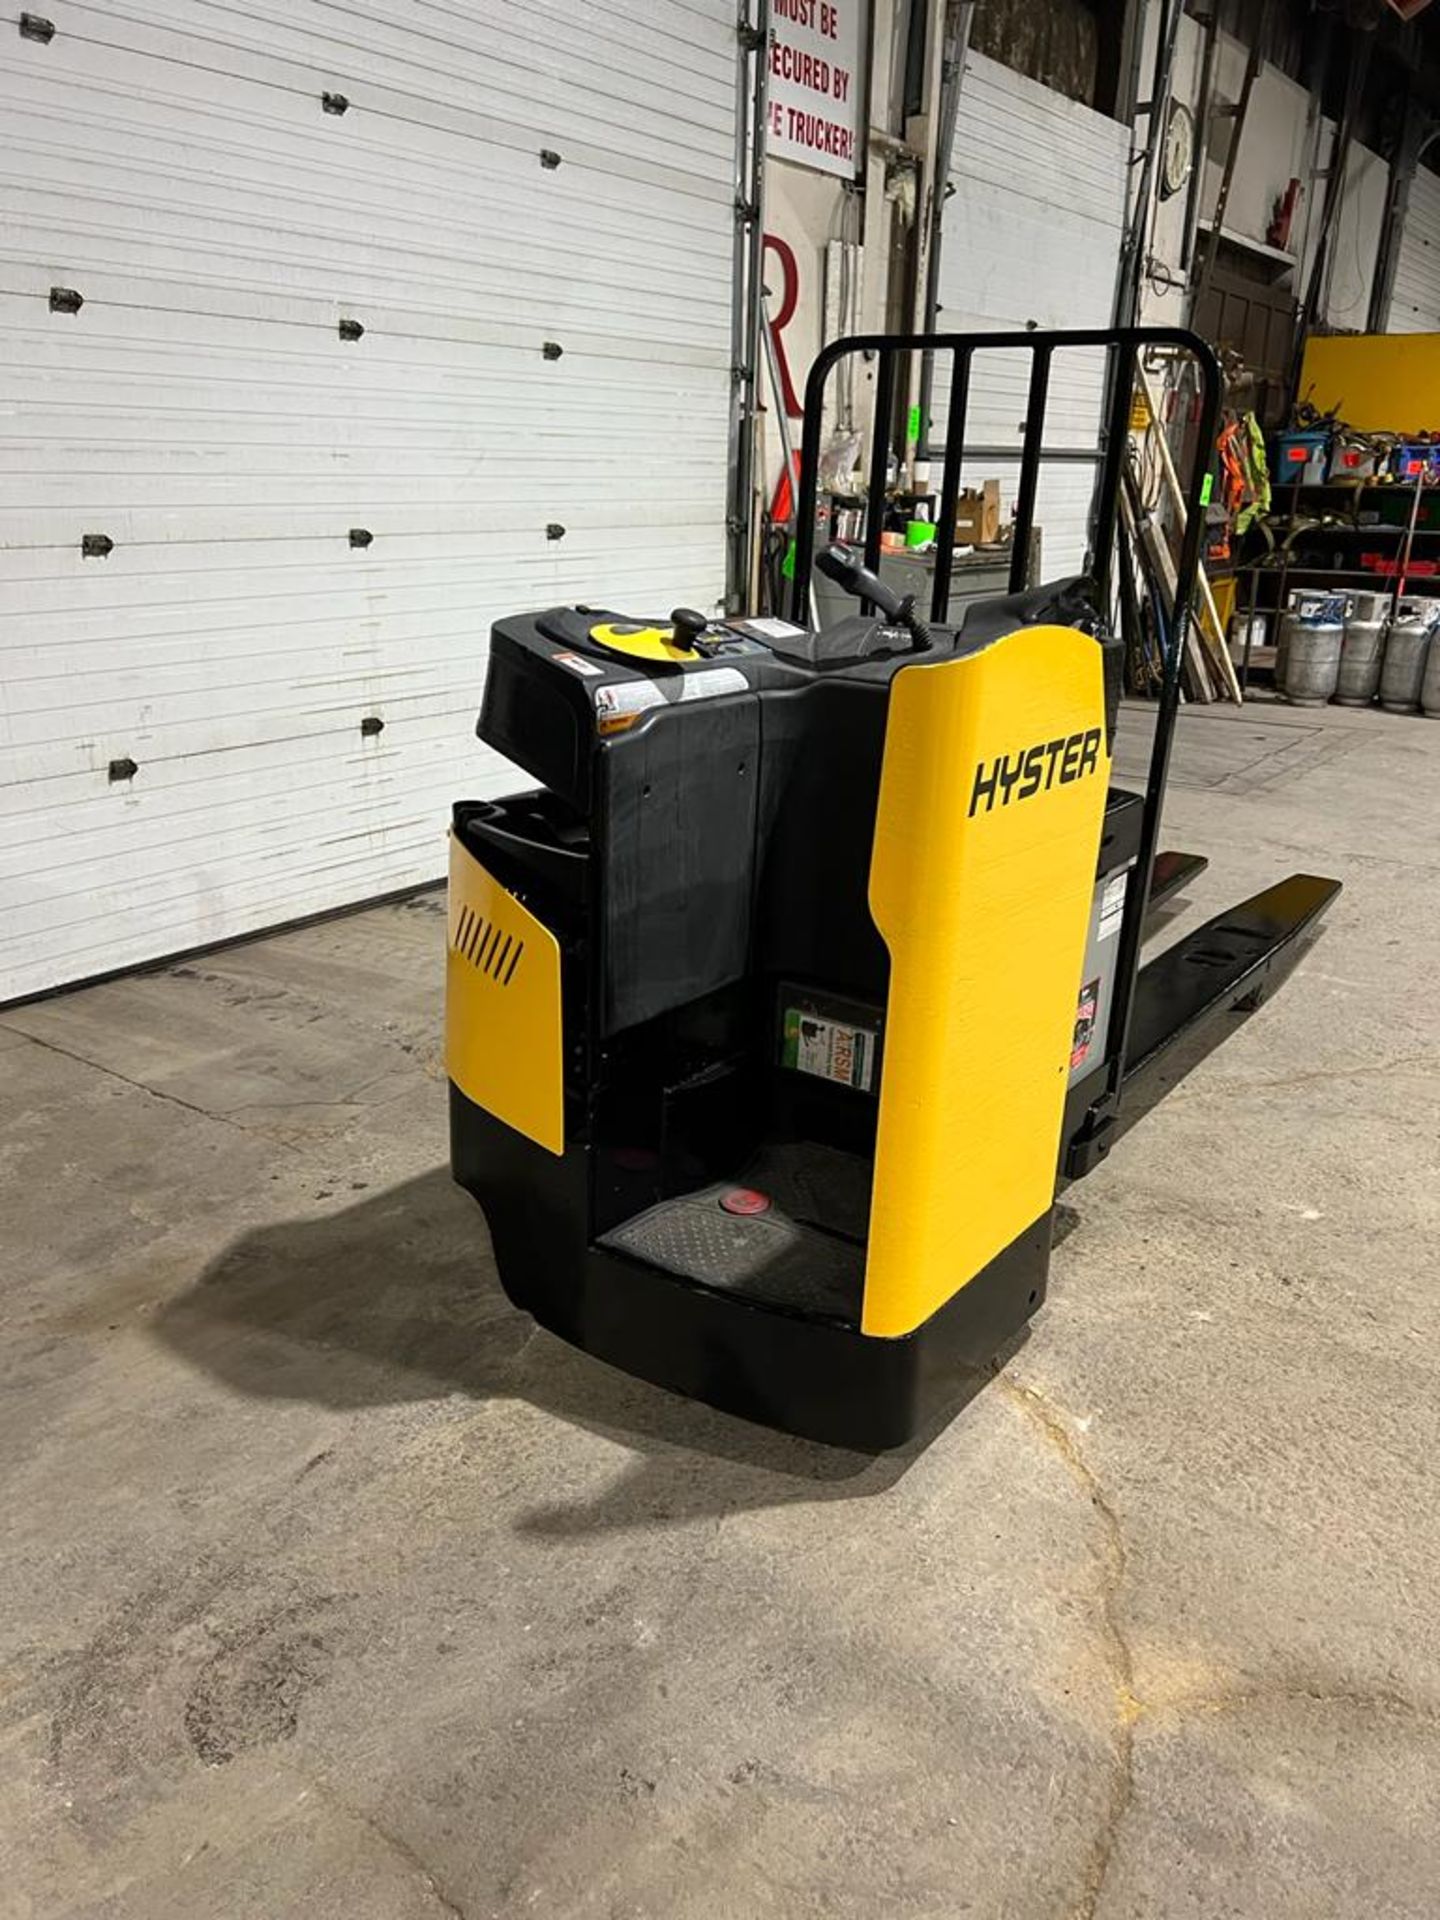 NICE 2015 Hyster Ride-On END RIDER Powered Pallet Truck 8' Long Forks 8000lbs capacity Safety to - Image 2 of 4